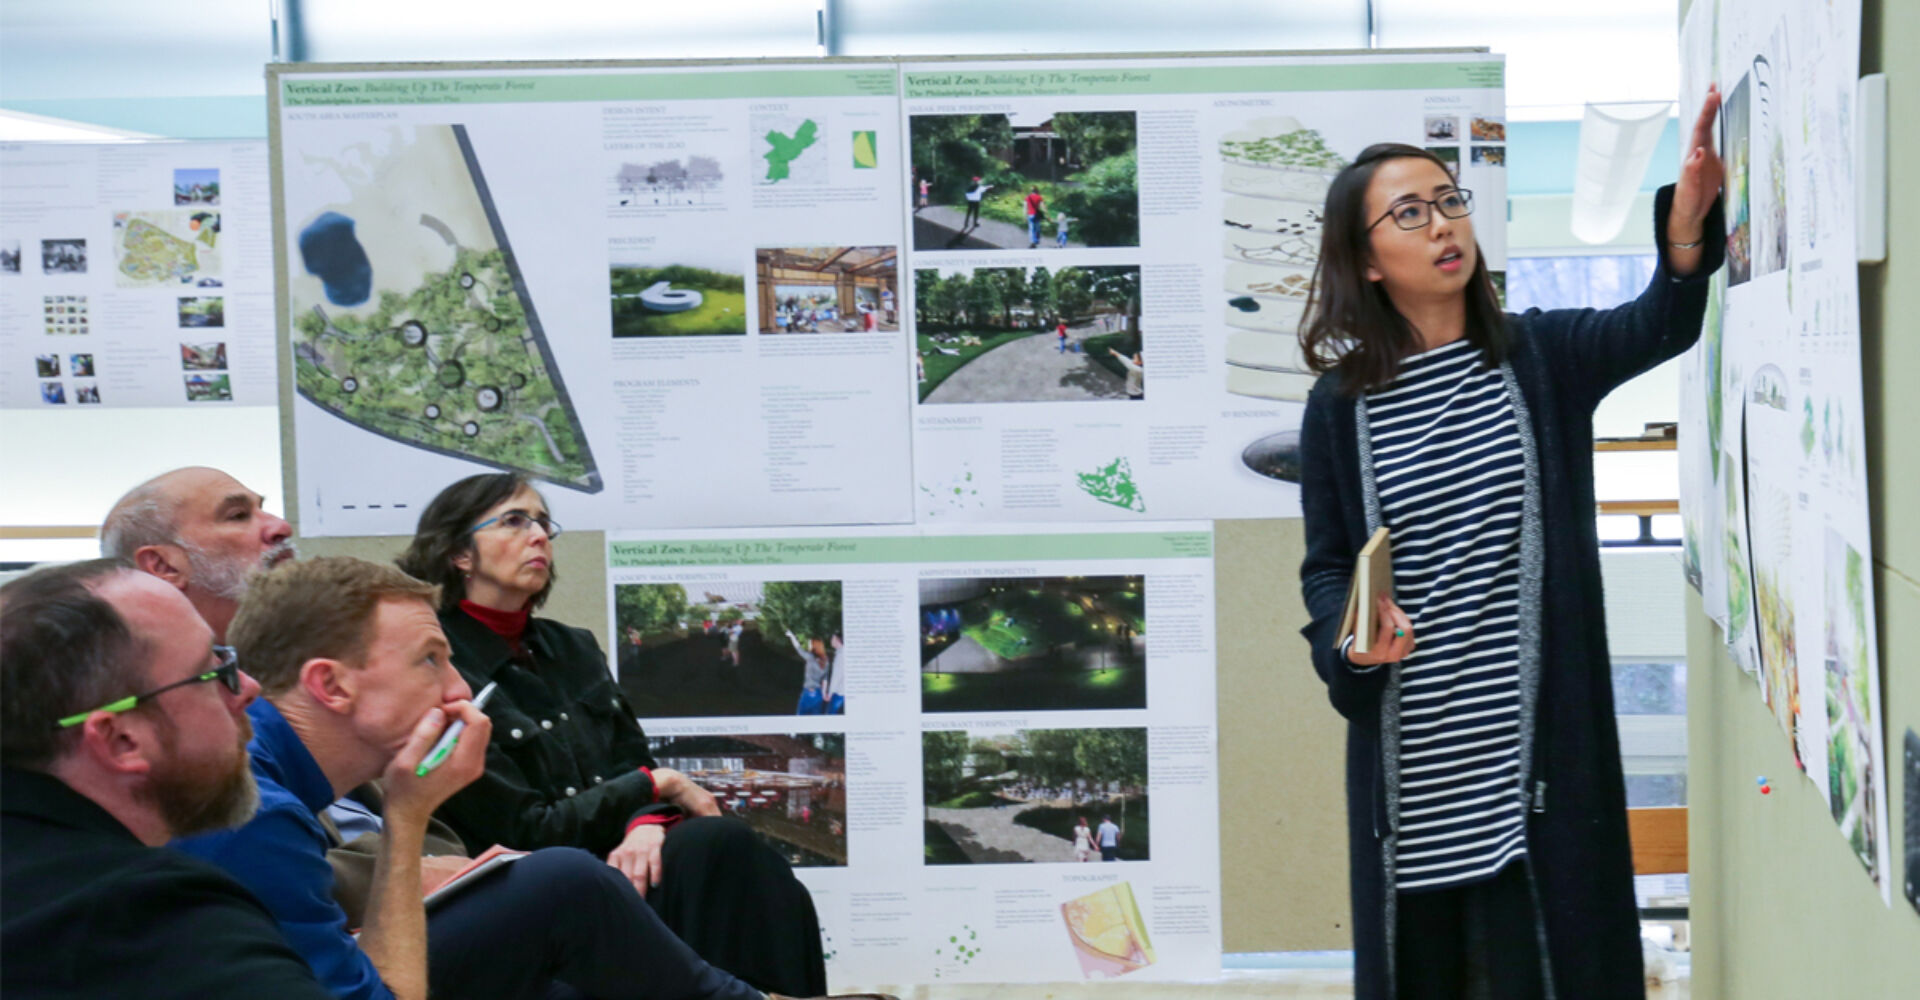 A woman with glasses and dark shoulder-length hair gestures at a board displaying landscape architecture plans. Four members of an audience sit in chairs looking with great focus at the plans as the woman describes them.